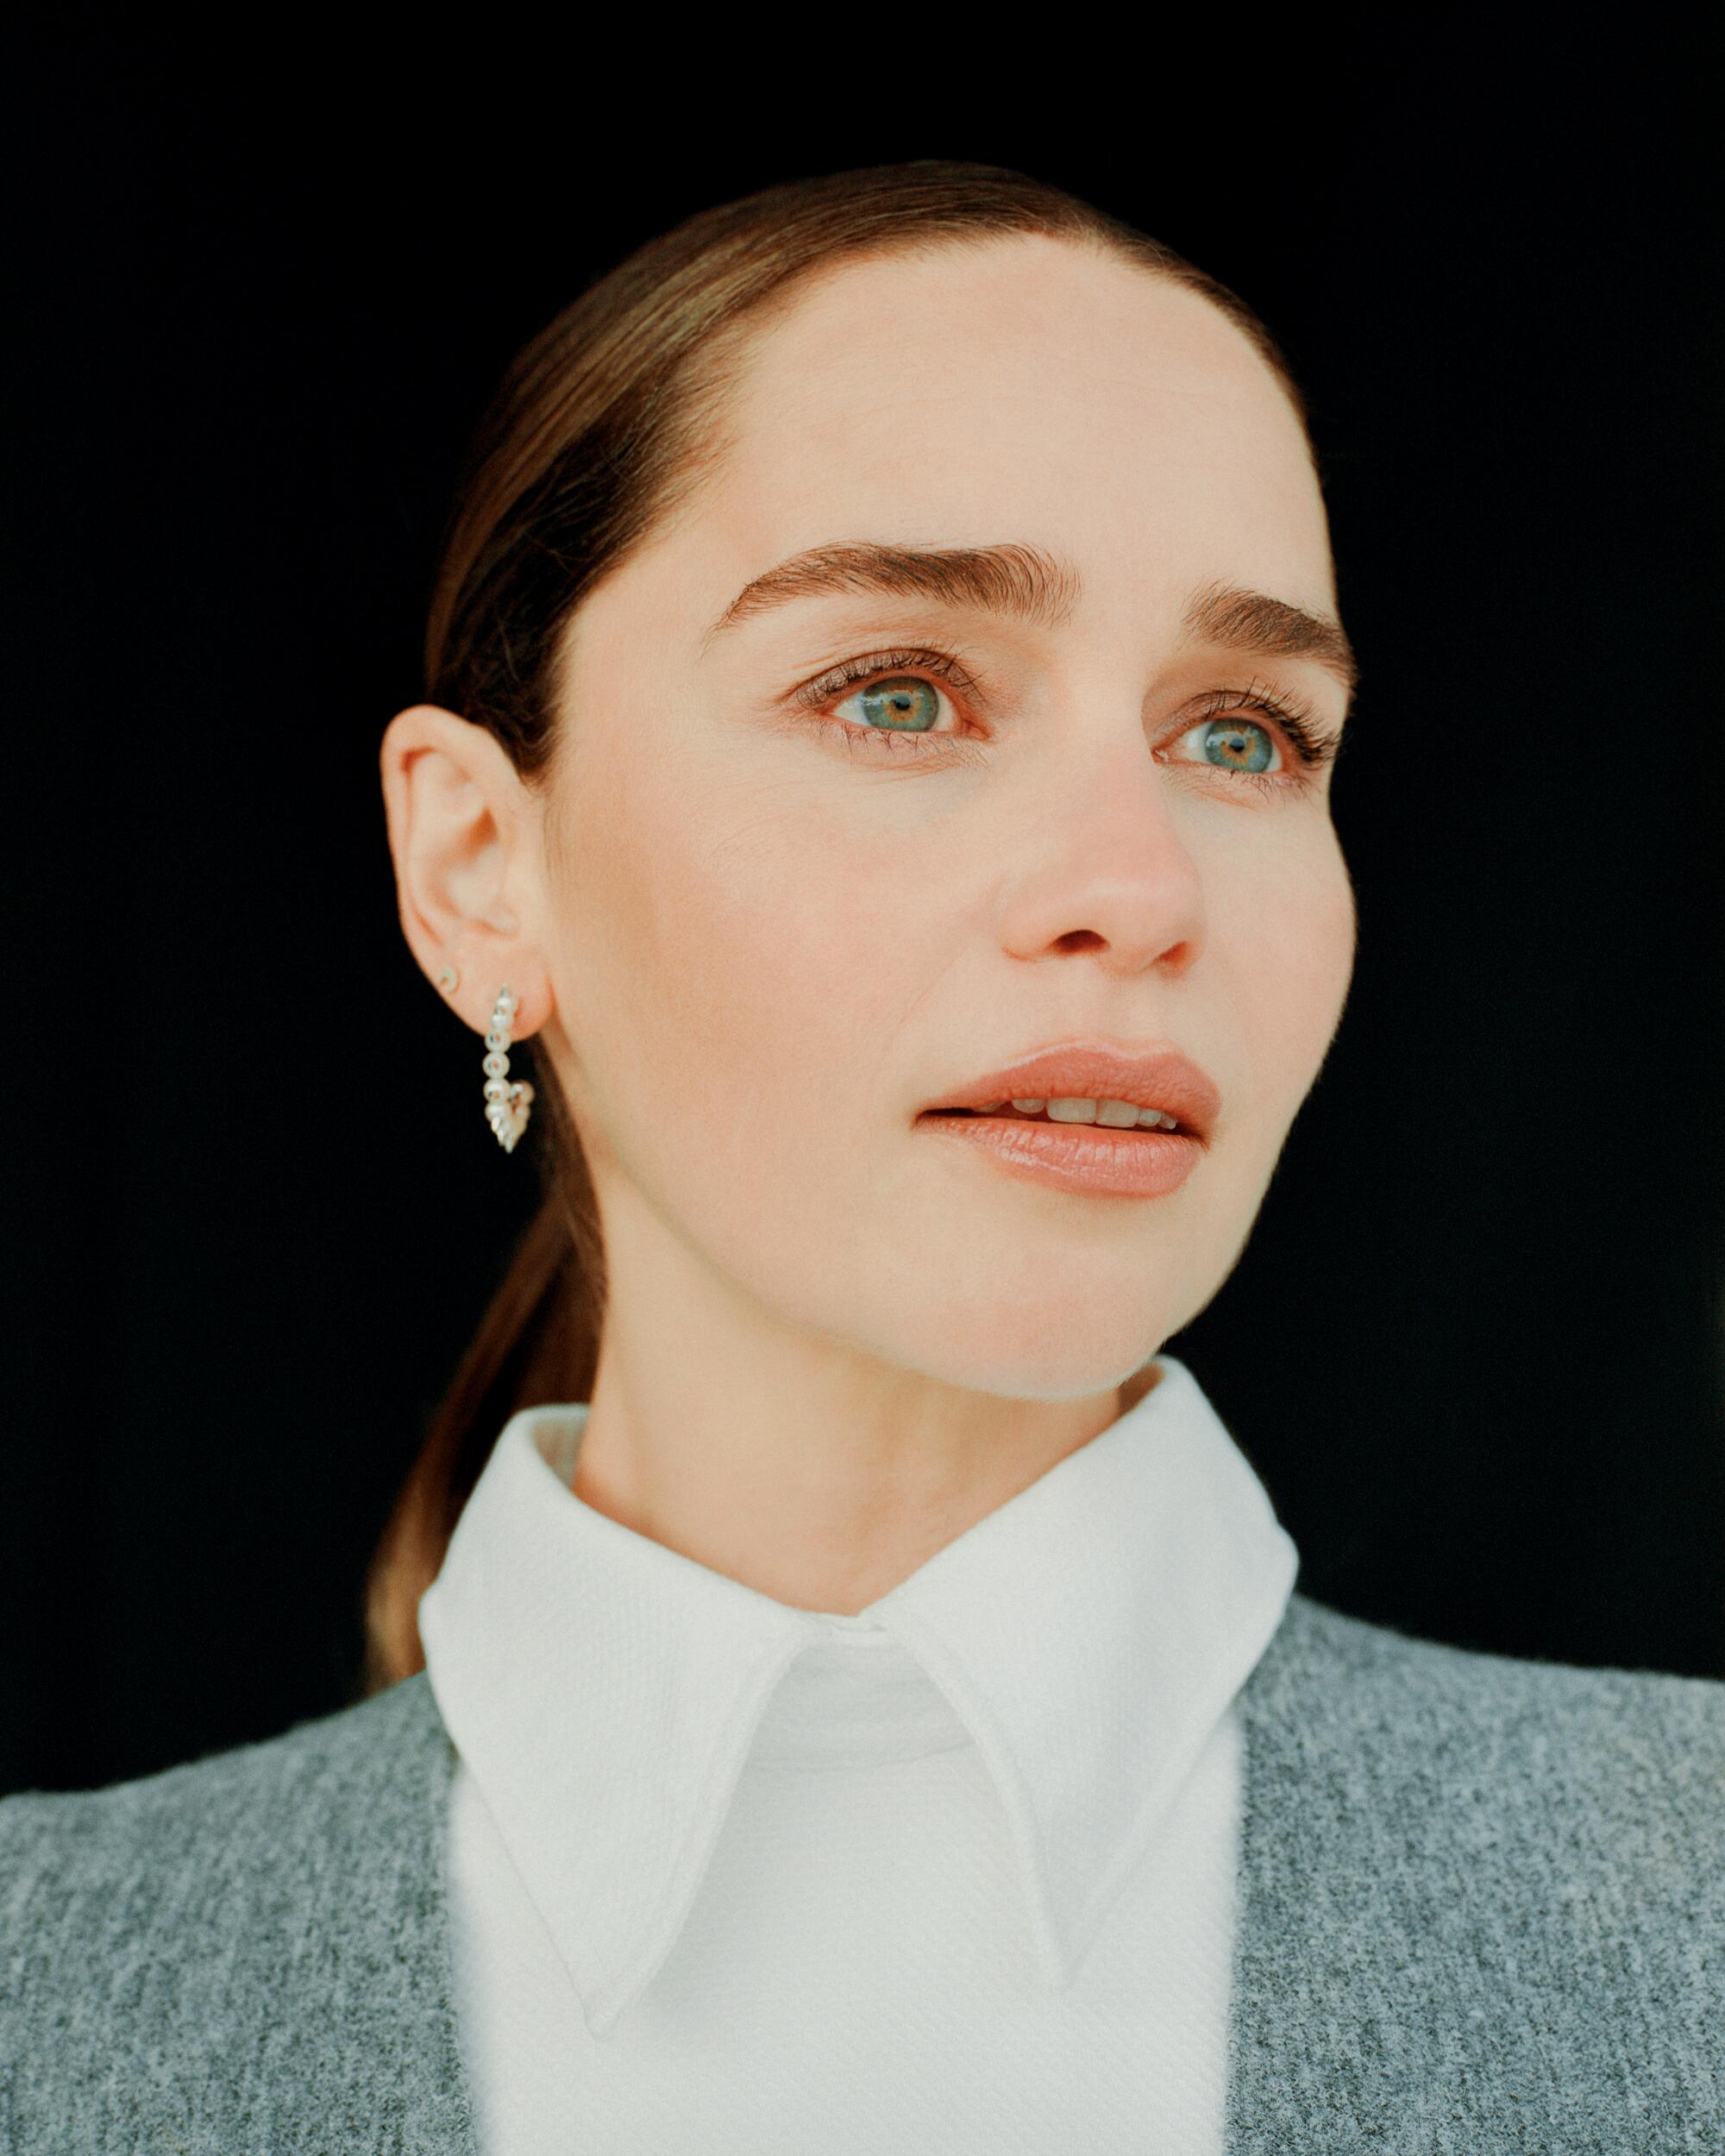 Emilia Clarke, in a collared white shirt and gray jacket, looks to the side.